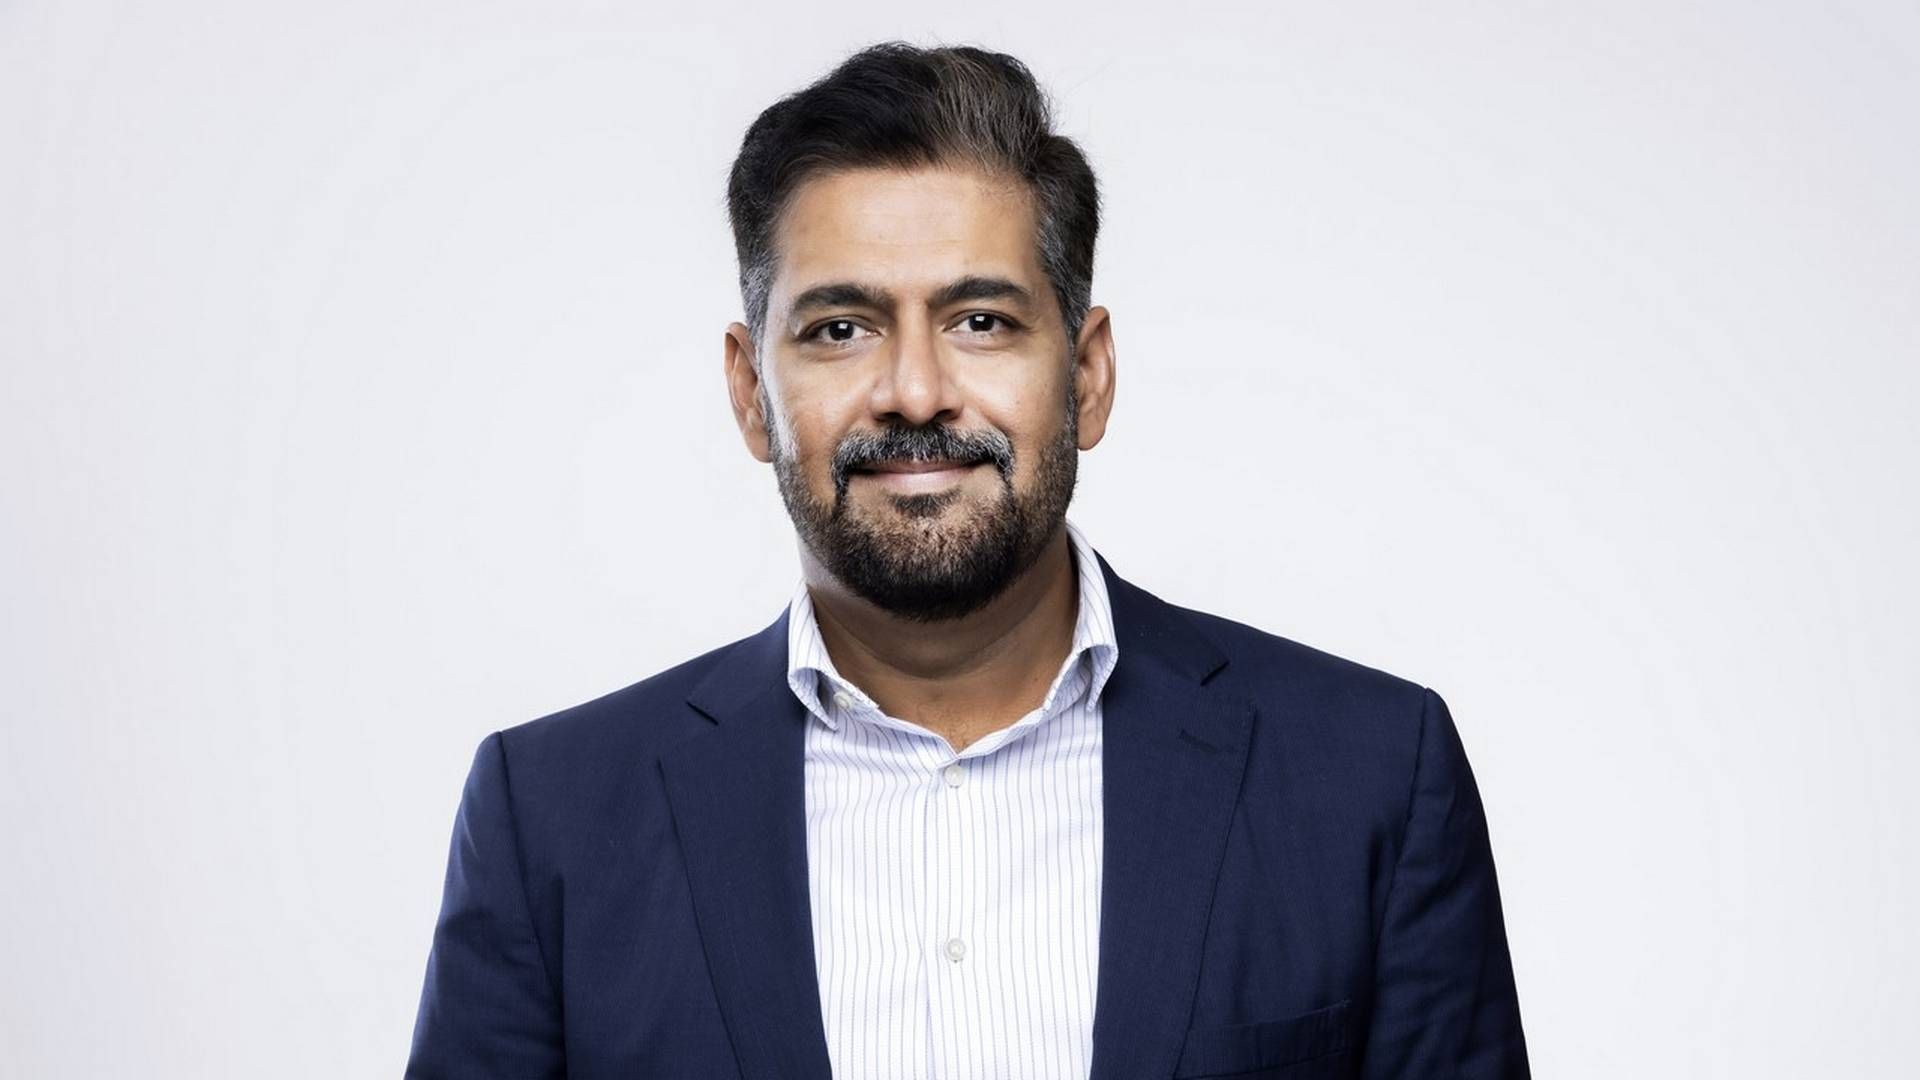 Djeeraj Bhatia will join Hapag-Lloyd's Executive Board on January 1, 2024 and will become CEO of the company's new terminal company, Hapag-Lloyd Terminal Holding, in Rotterdam | Photo: Hapag-lloyd